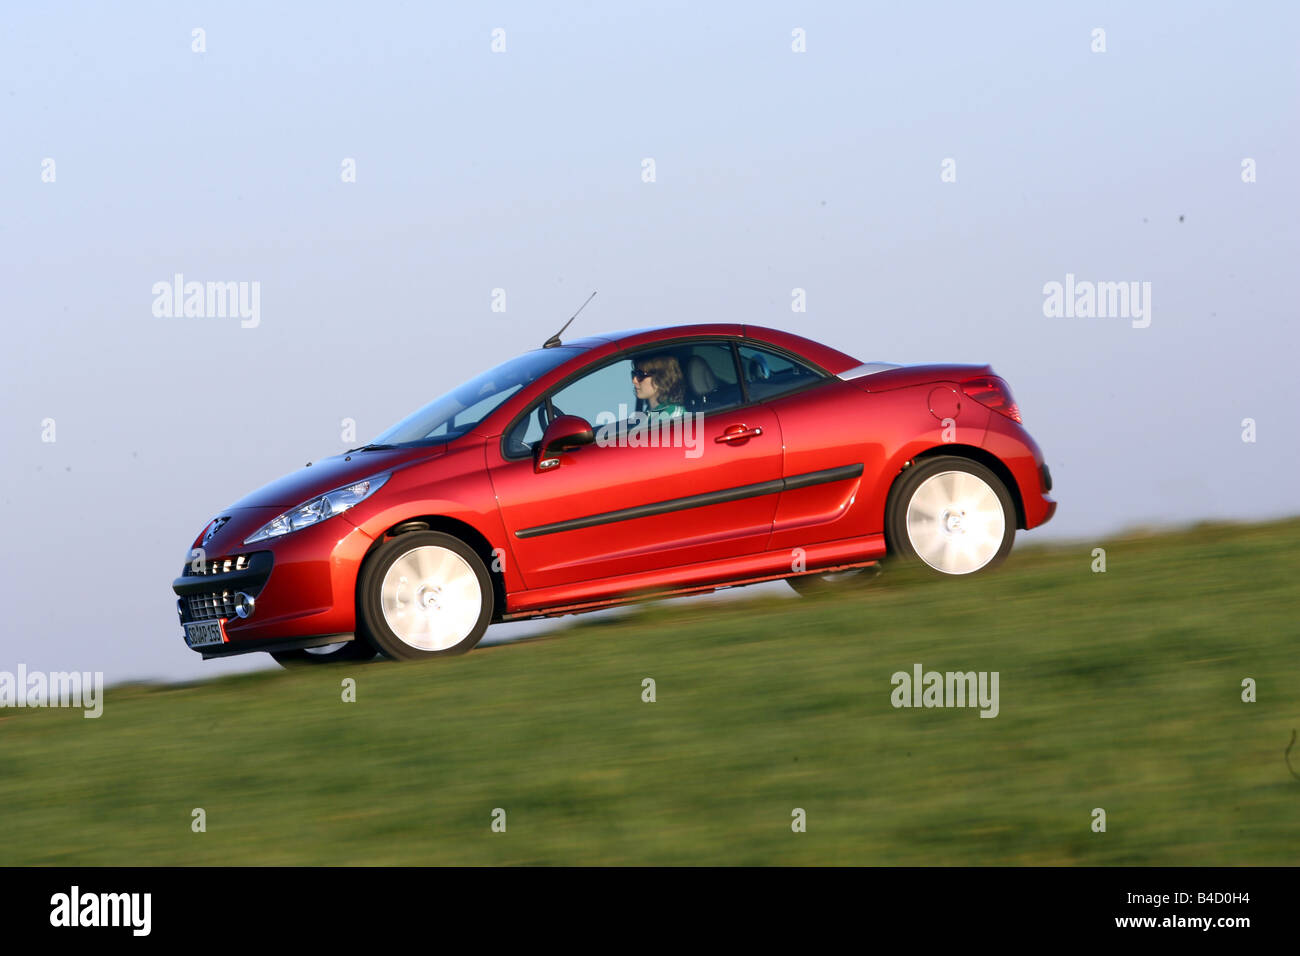 https://c8.alamy.com/comp/B4D0H4/peugeot-207-cc-model-year-2007-red-driving-side-view-country-road-B4D0H4.jpg